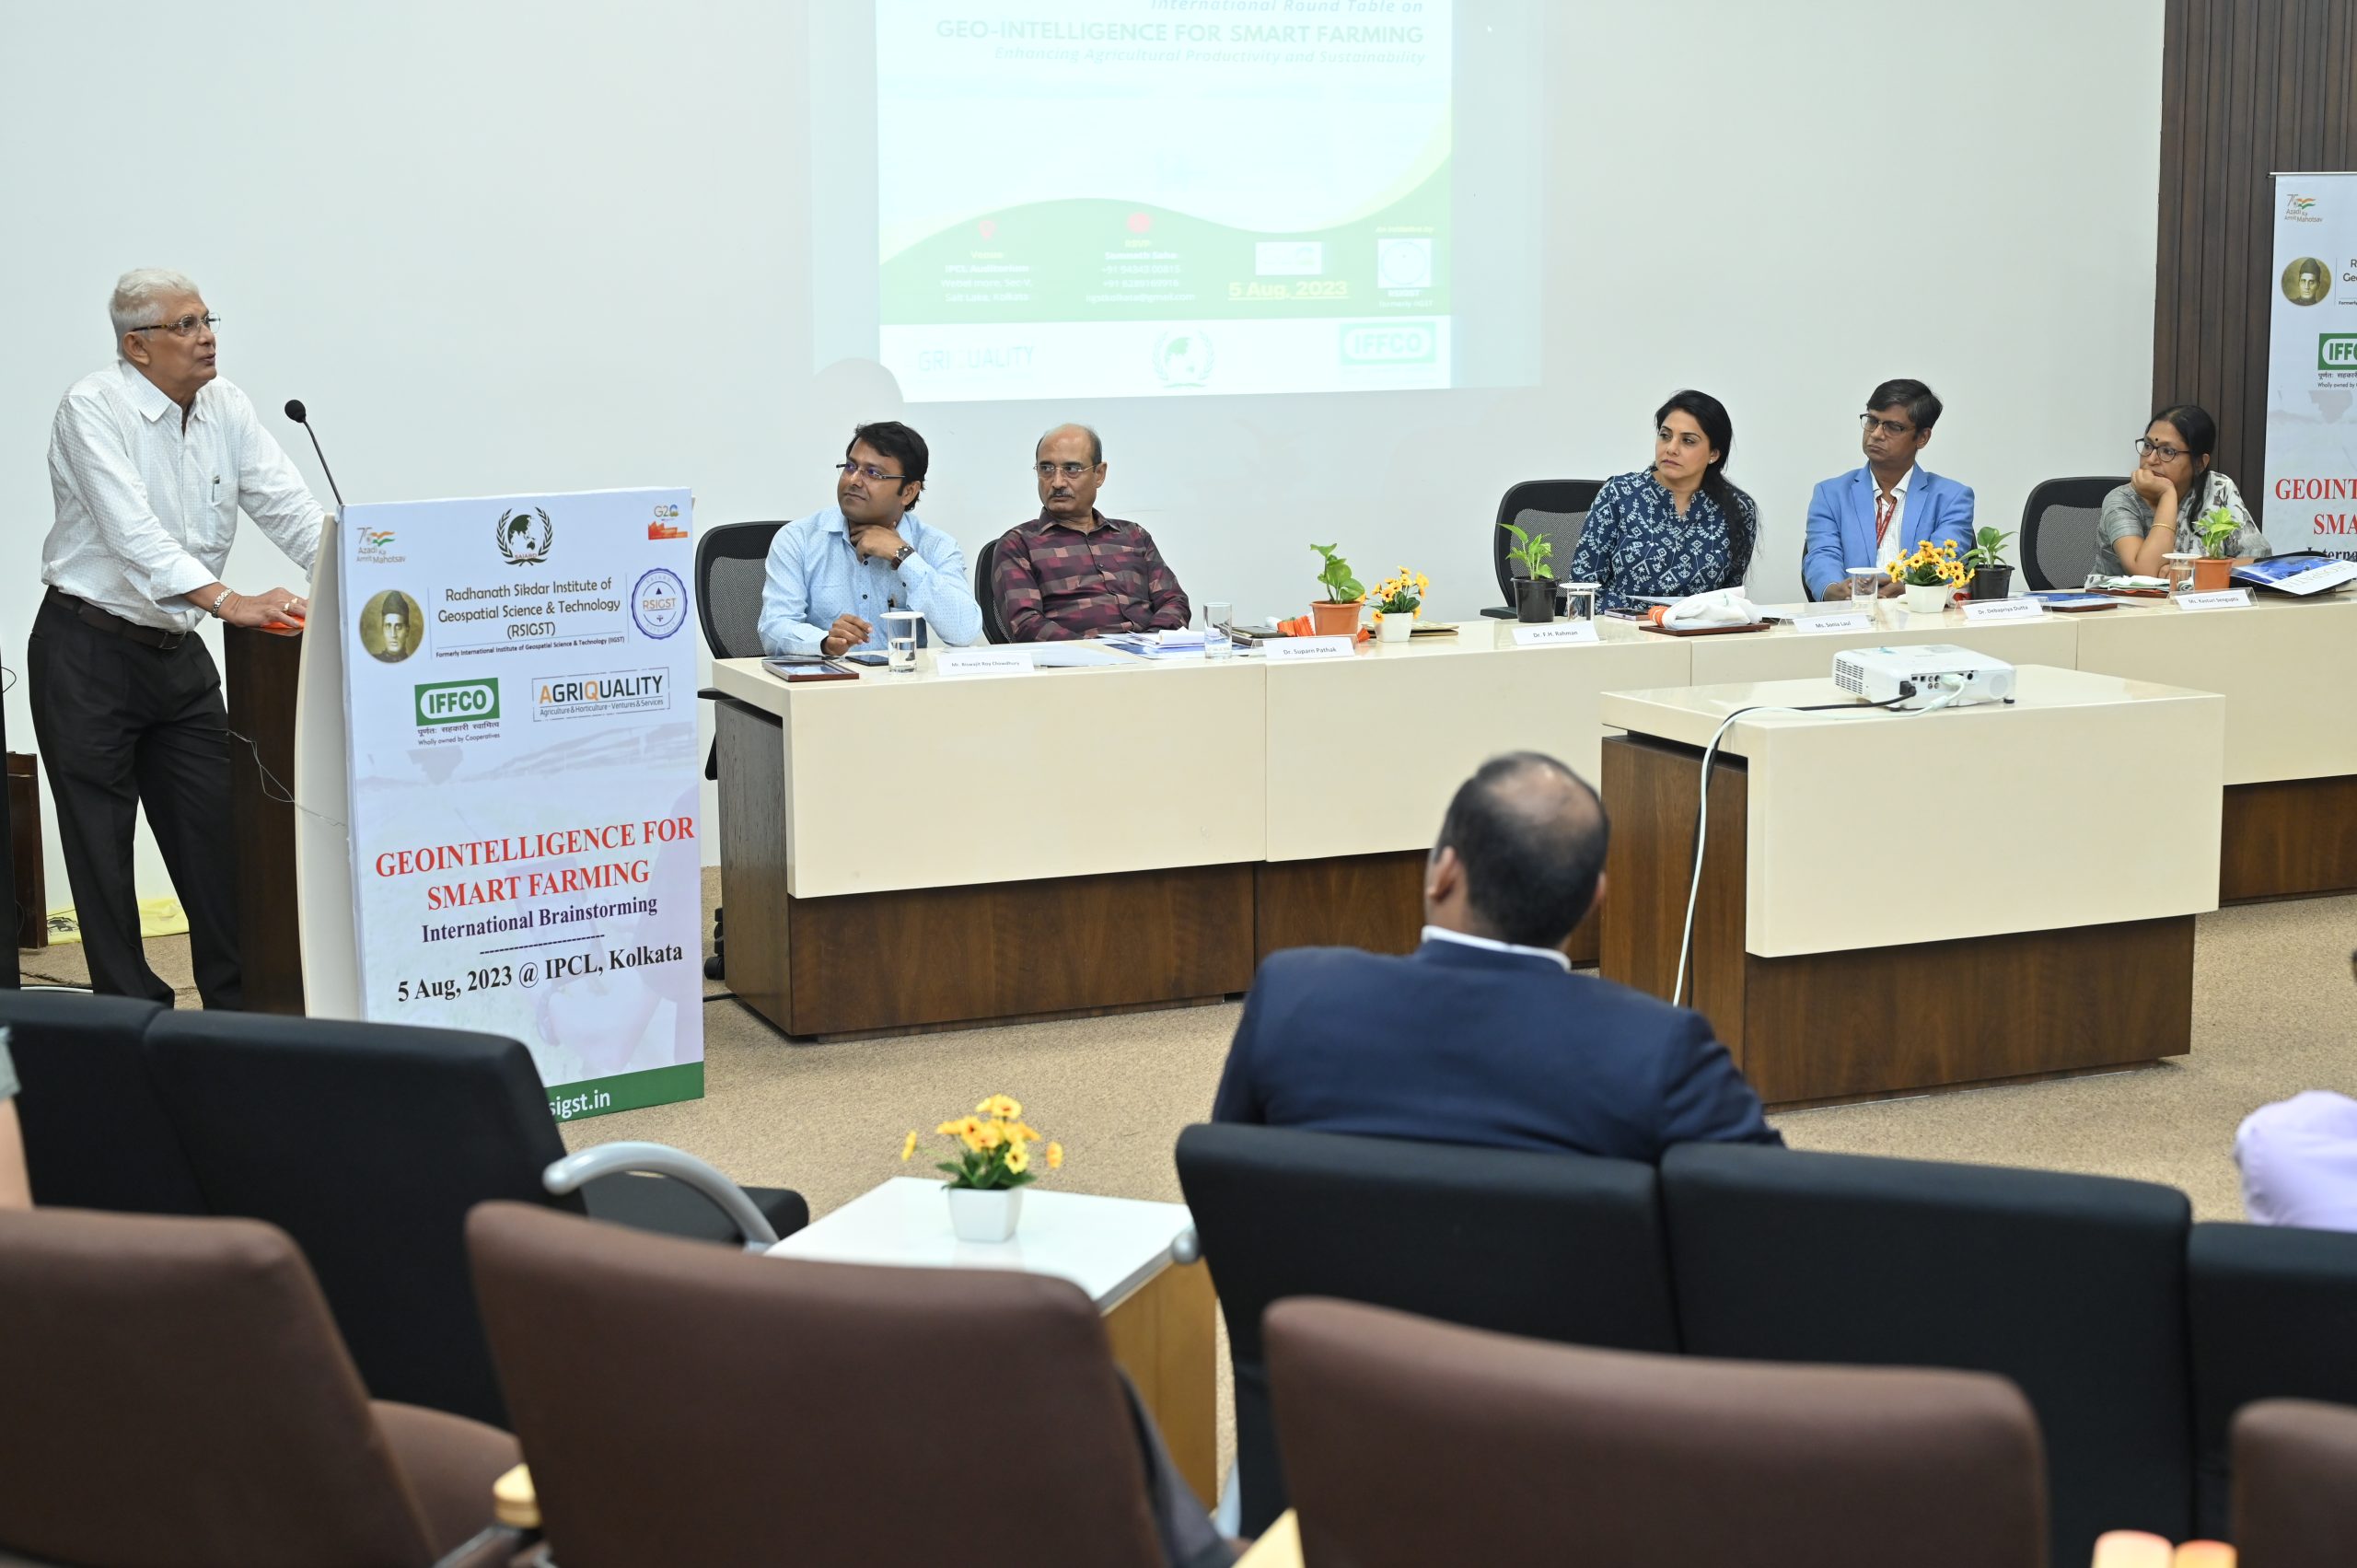 The event, titled "Geointelligence for Smart Farming: International Brainstorming," took place at Indian Power Corporation Limited and was organized by Radhanath Sikdar Institute of Geospatial Science and Technology.